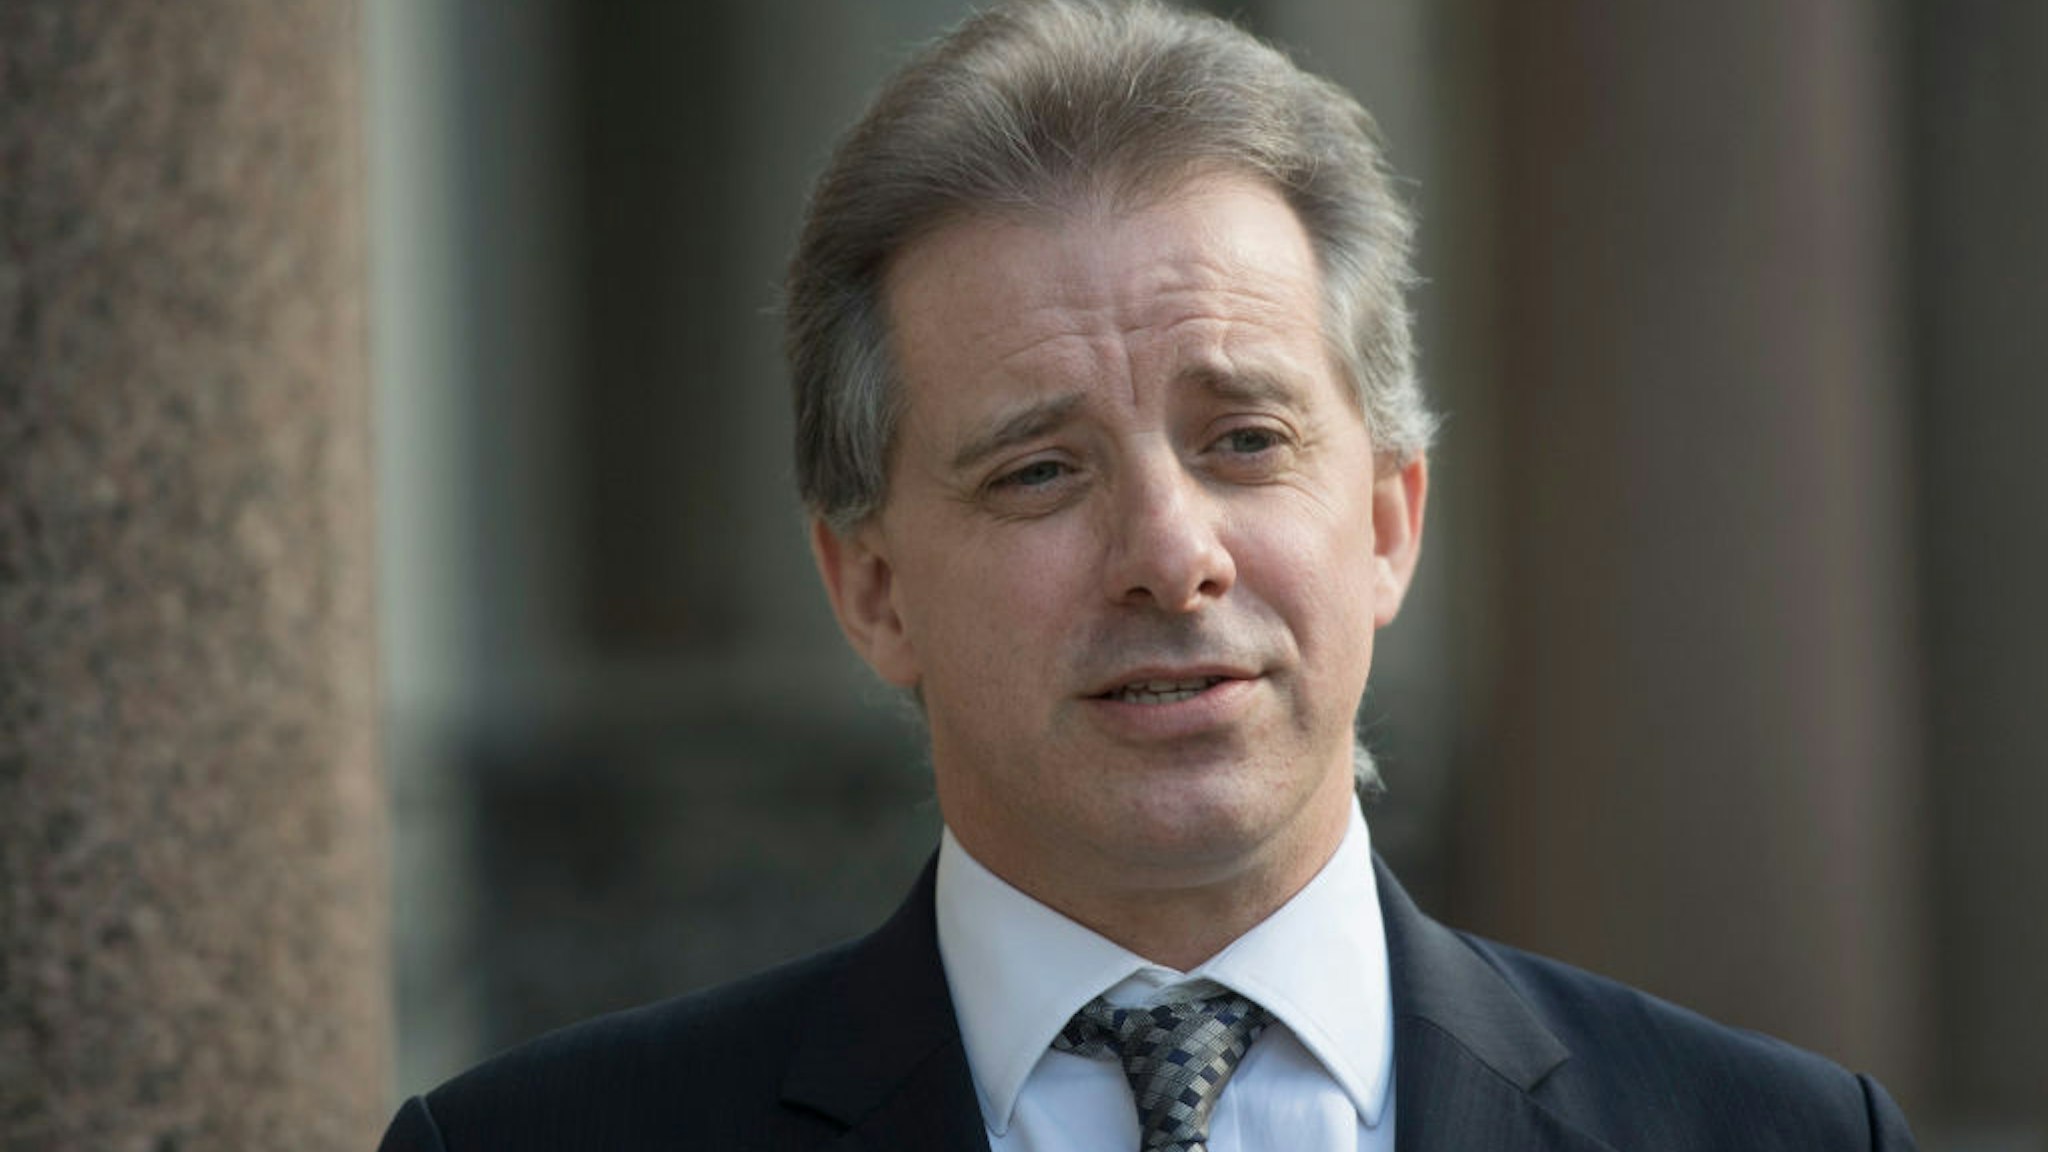 Christopher Steele, the former MI6 agent who set-up Orbis Business Intelligence and compiled a dossier on Donald Trump, in London where he has spoken to the media for the first time. (Photo by Victoria Jones/PA Images via Getty Images)